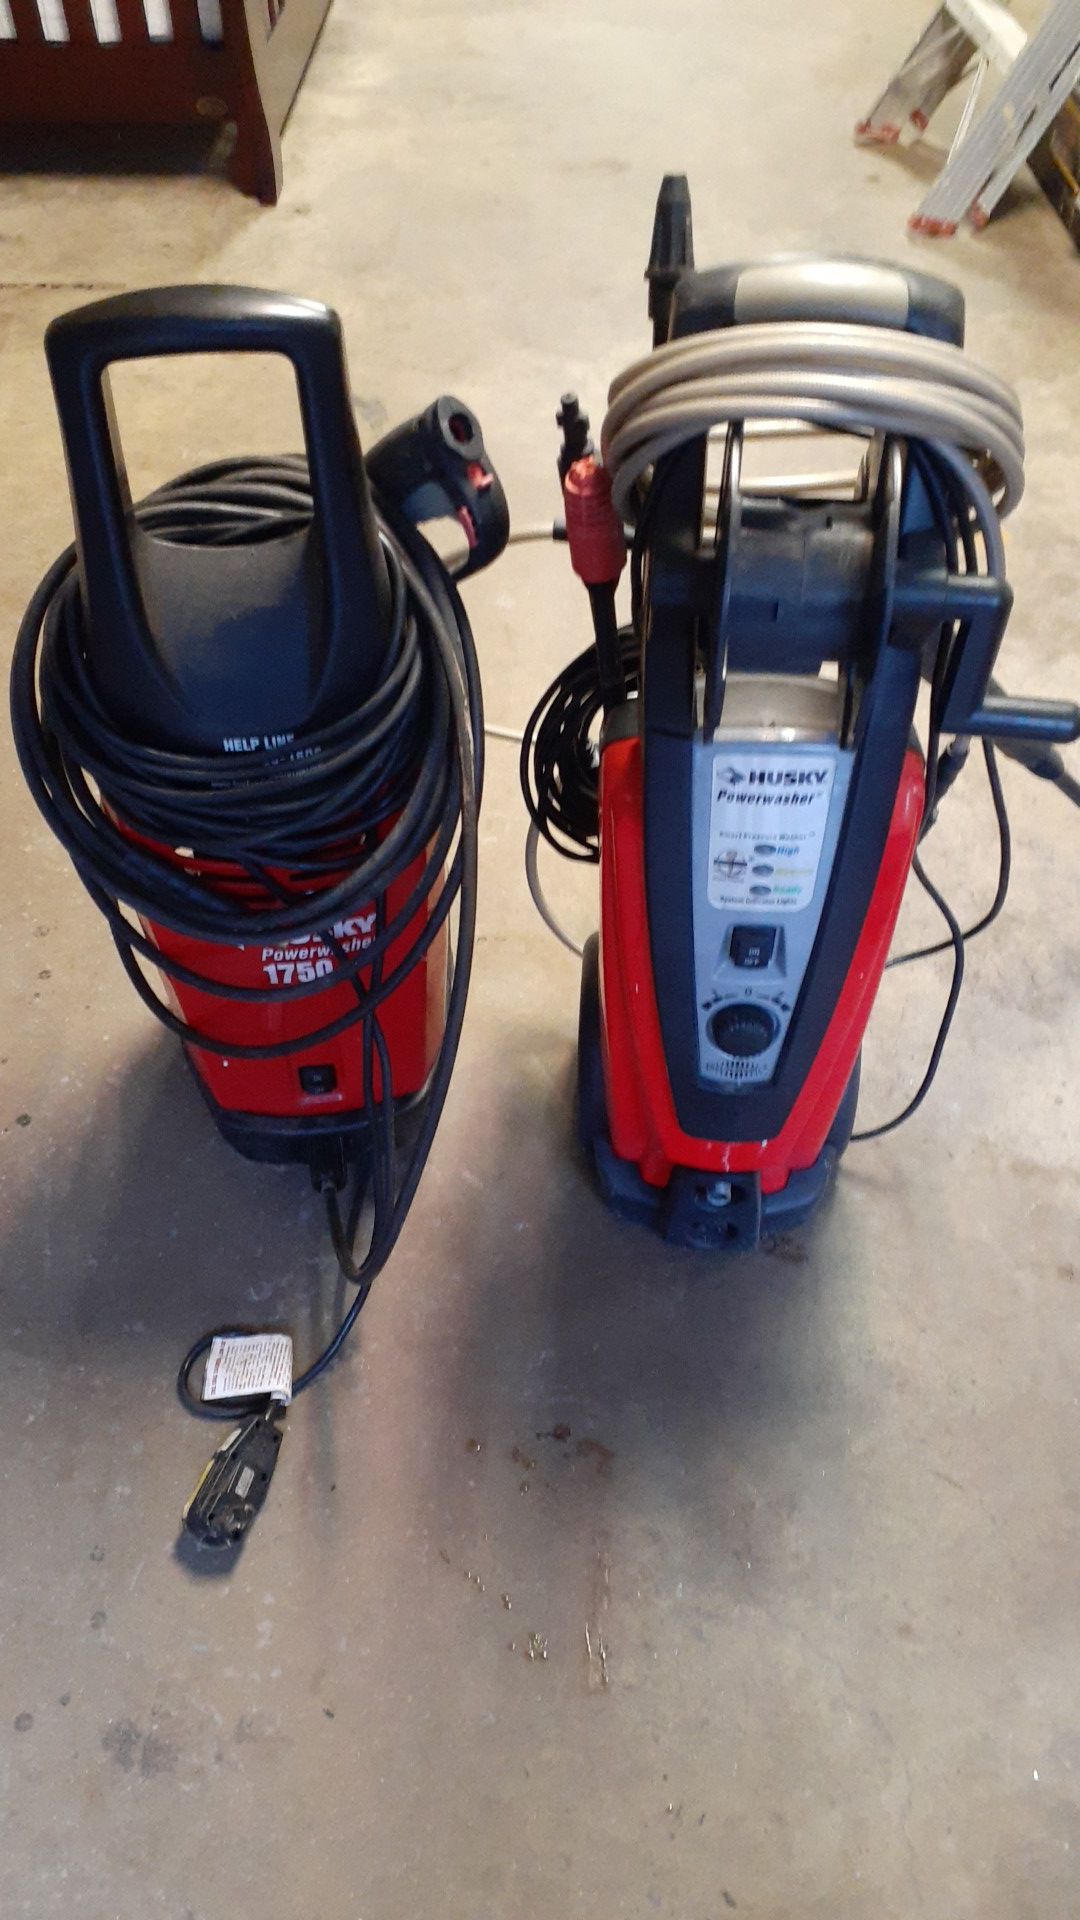 Husky electric power washers. One works great. The other doesn't throw as much pressure for some reason. Both for $150